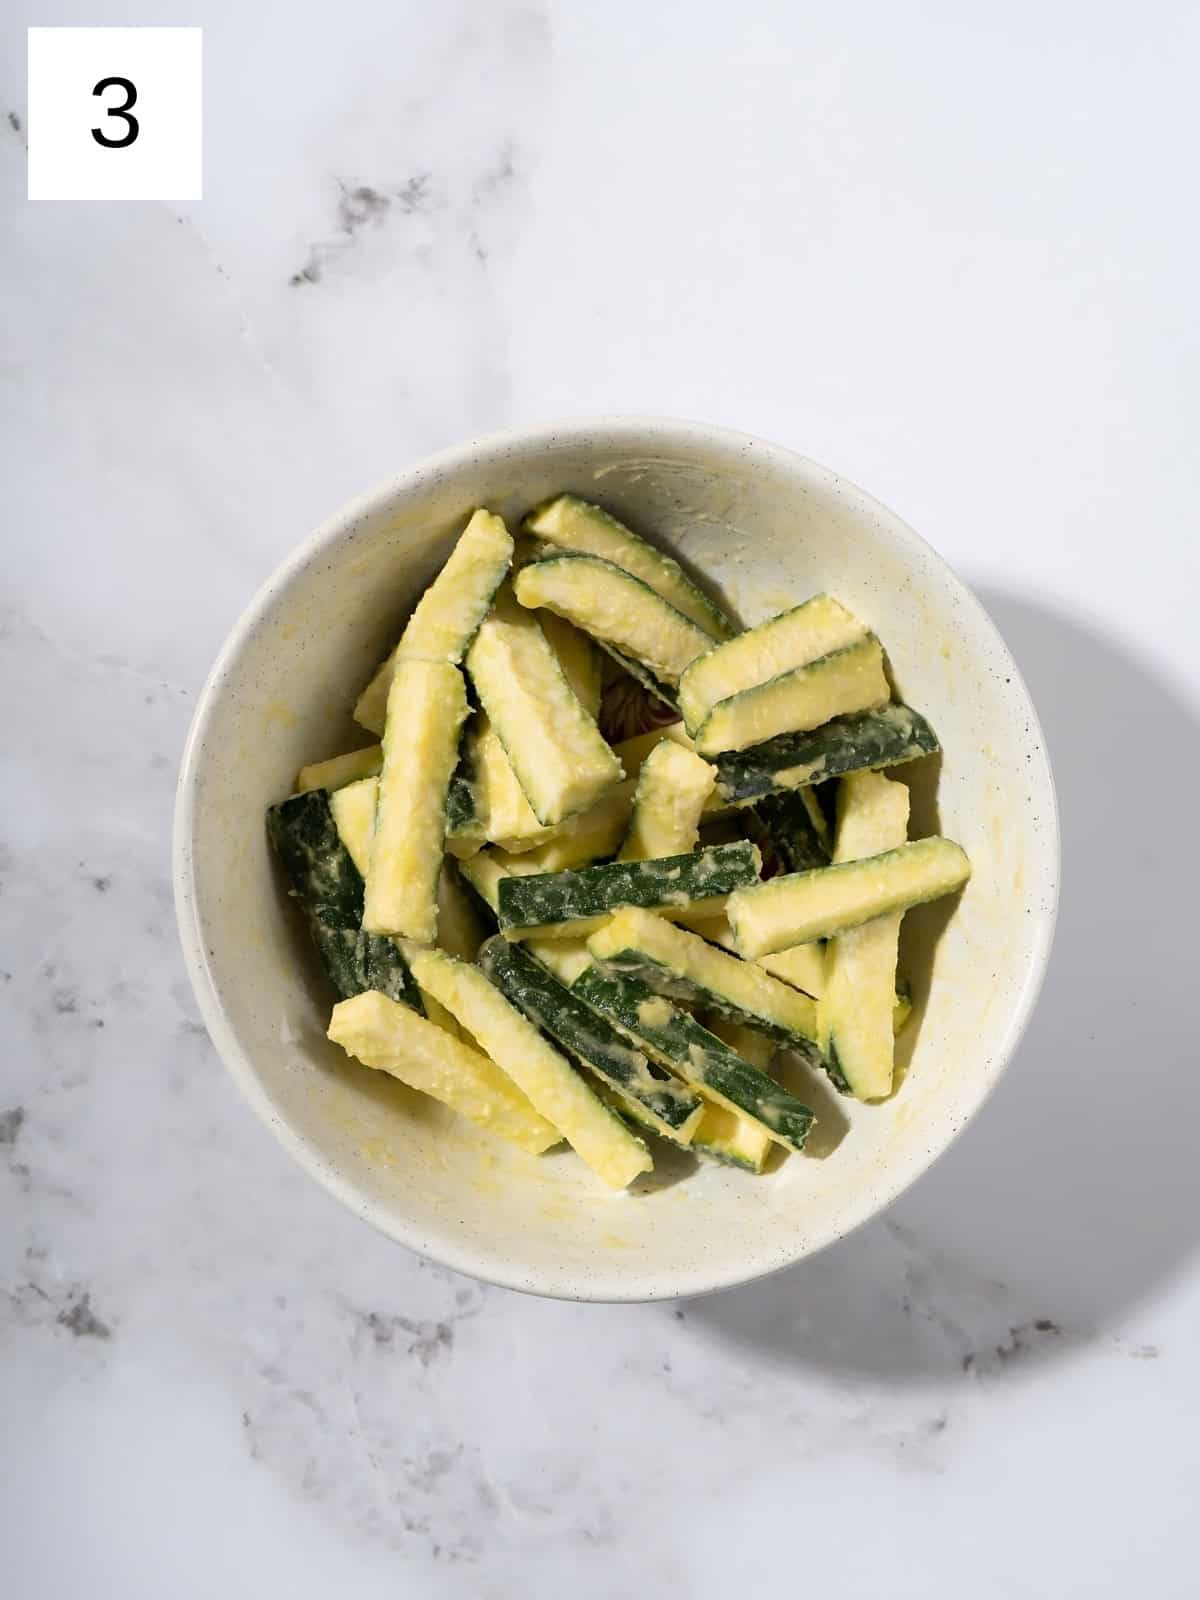 Chopped matchstick zucchinis covered with garlic powder in a bowl.